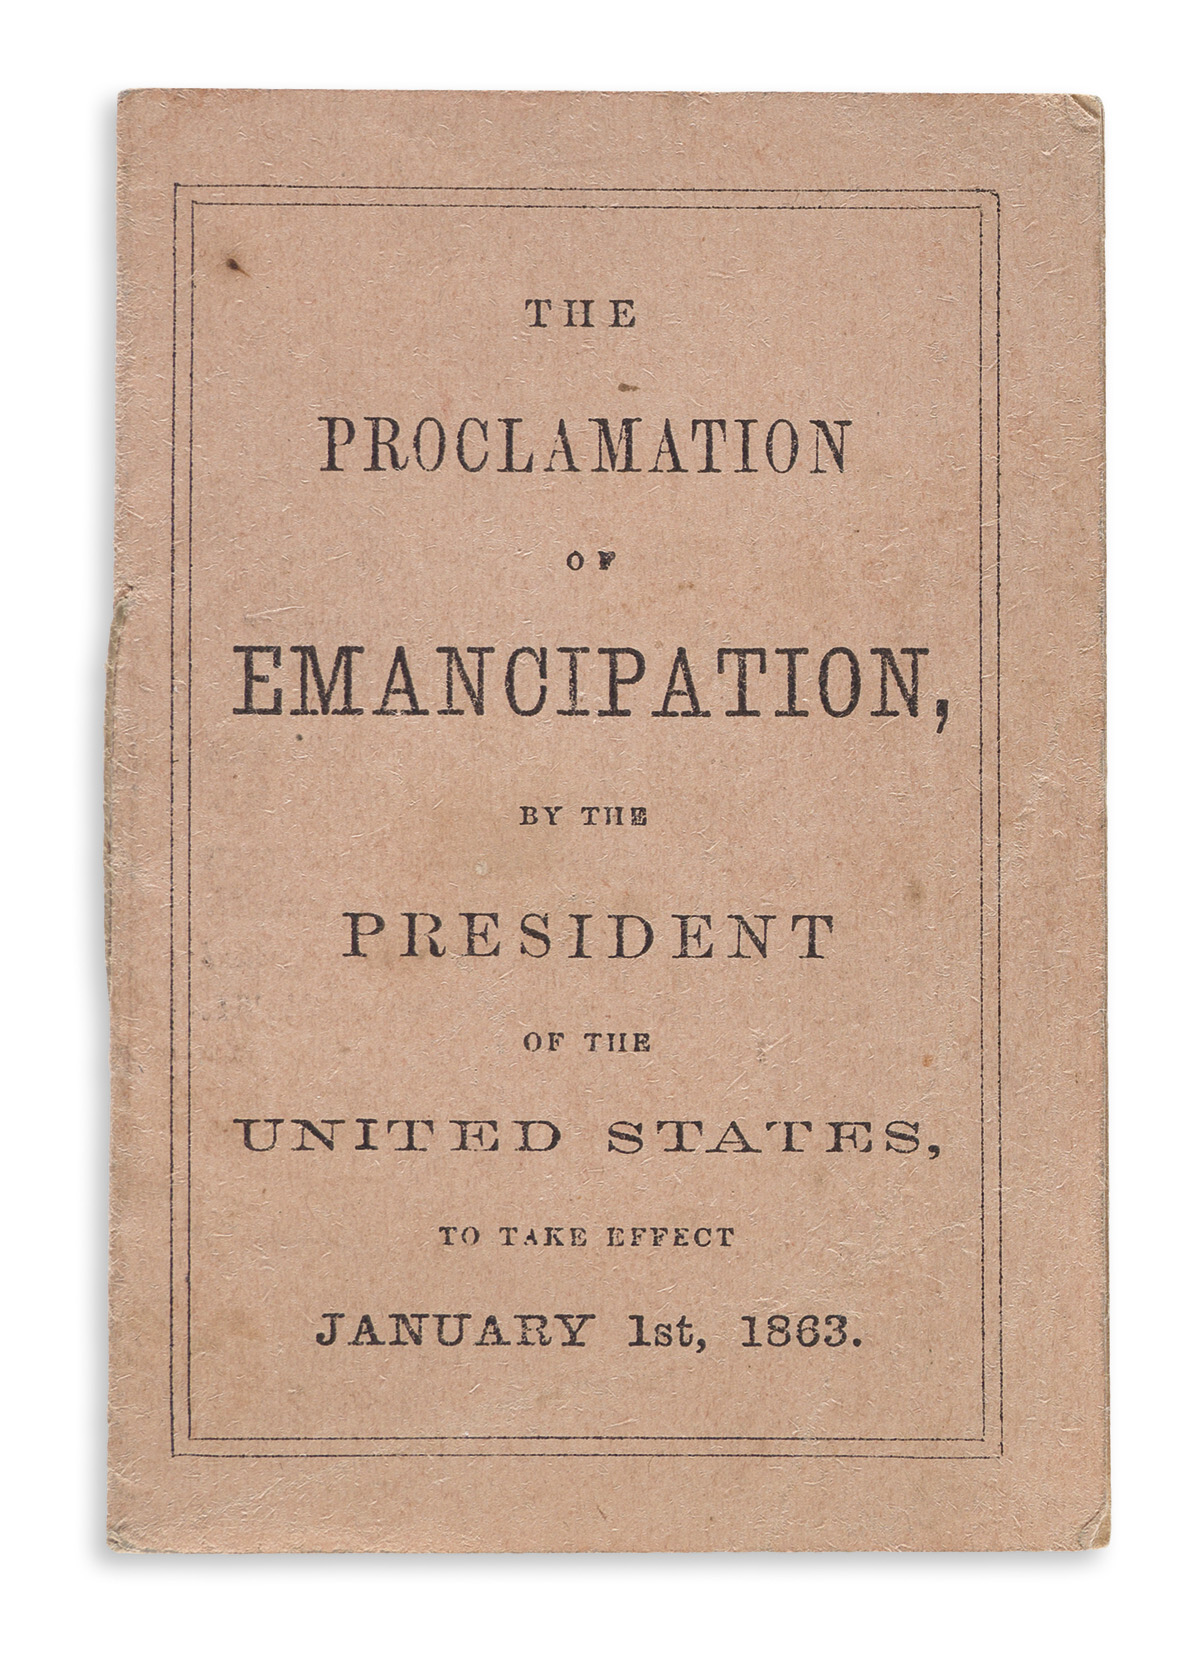 (SLAVERY AND ABOLITION.) Lincoln, Abraham. The Proclamation of Emancipation by the President of the United States,